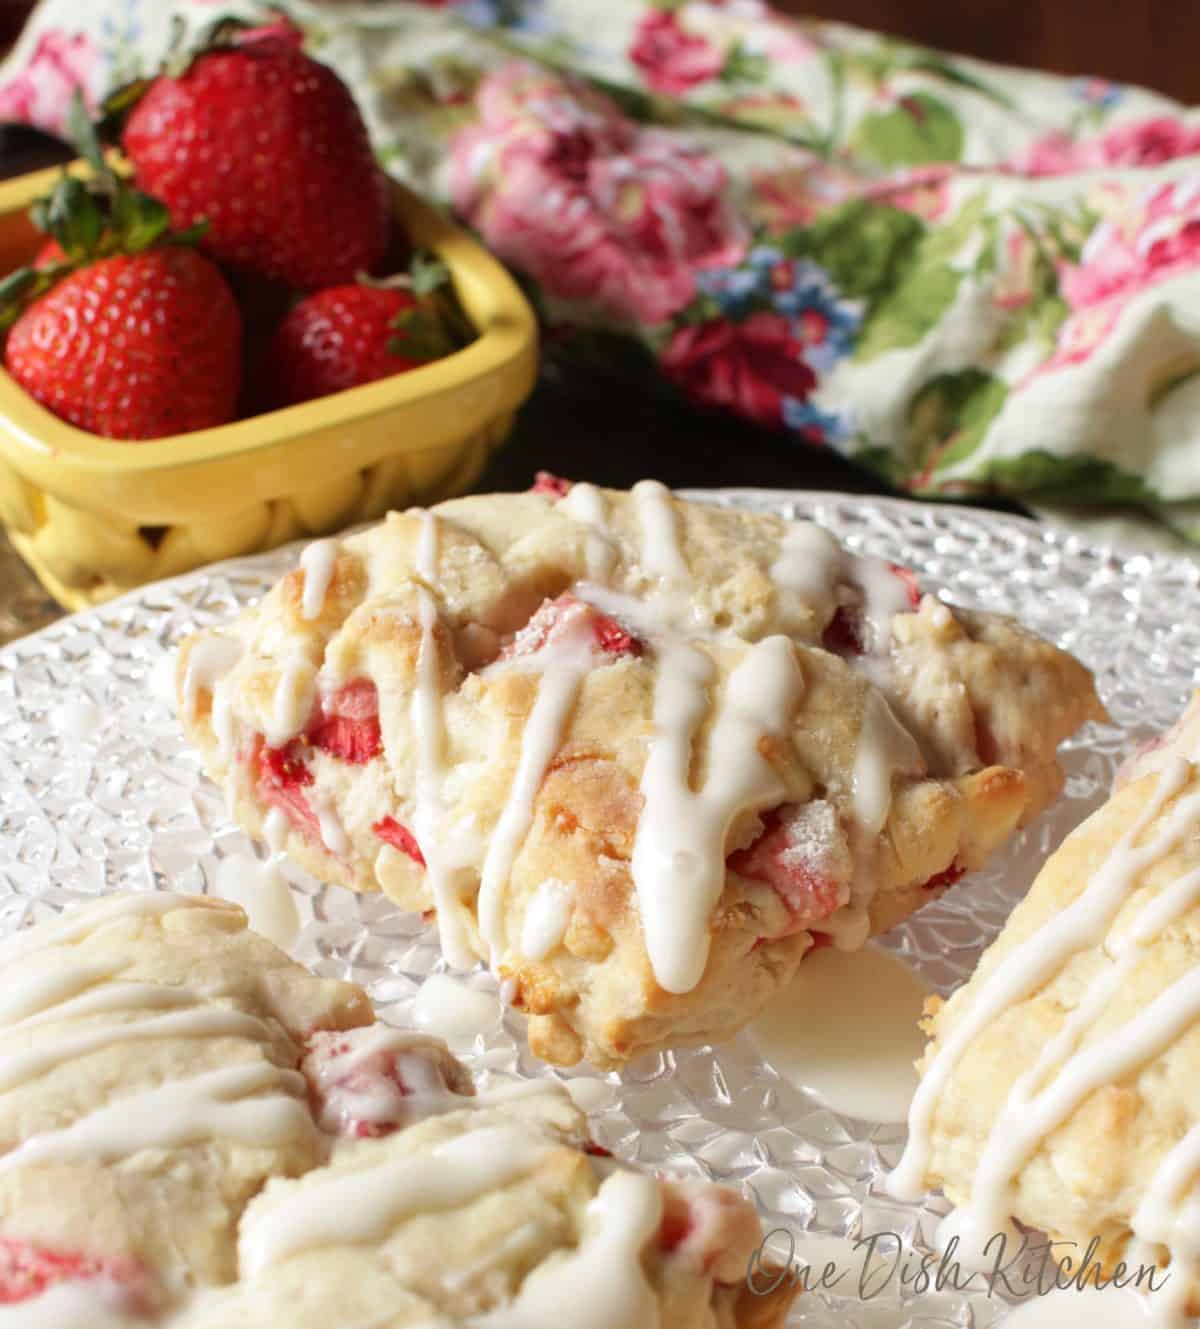 A closeup of strawberry scones with melted white chocolate drizzled over the top plated next to a small bowl of strawberries and a floral cloth napkin